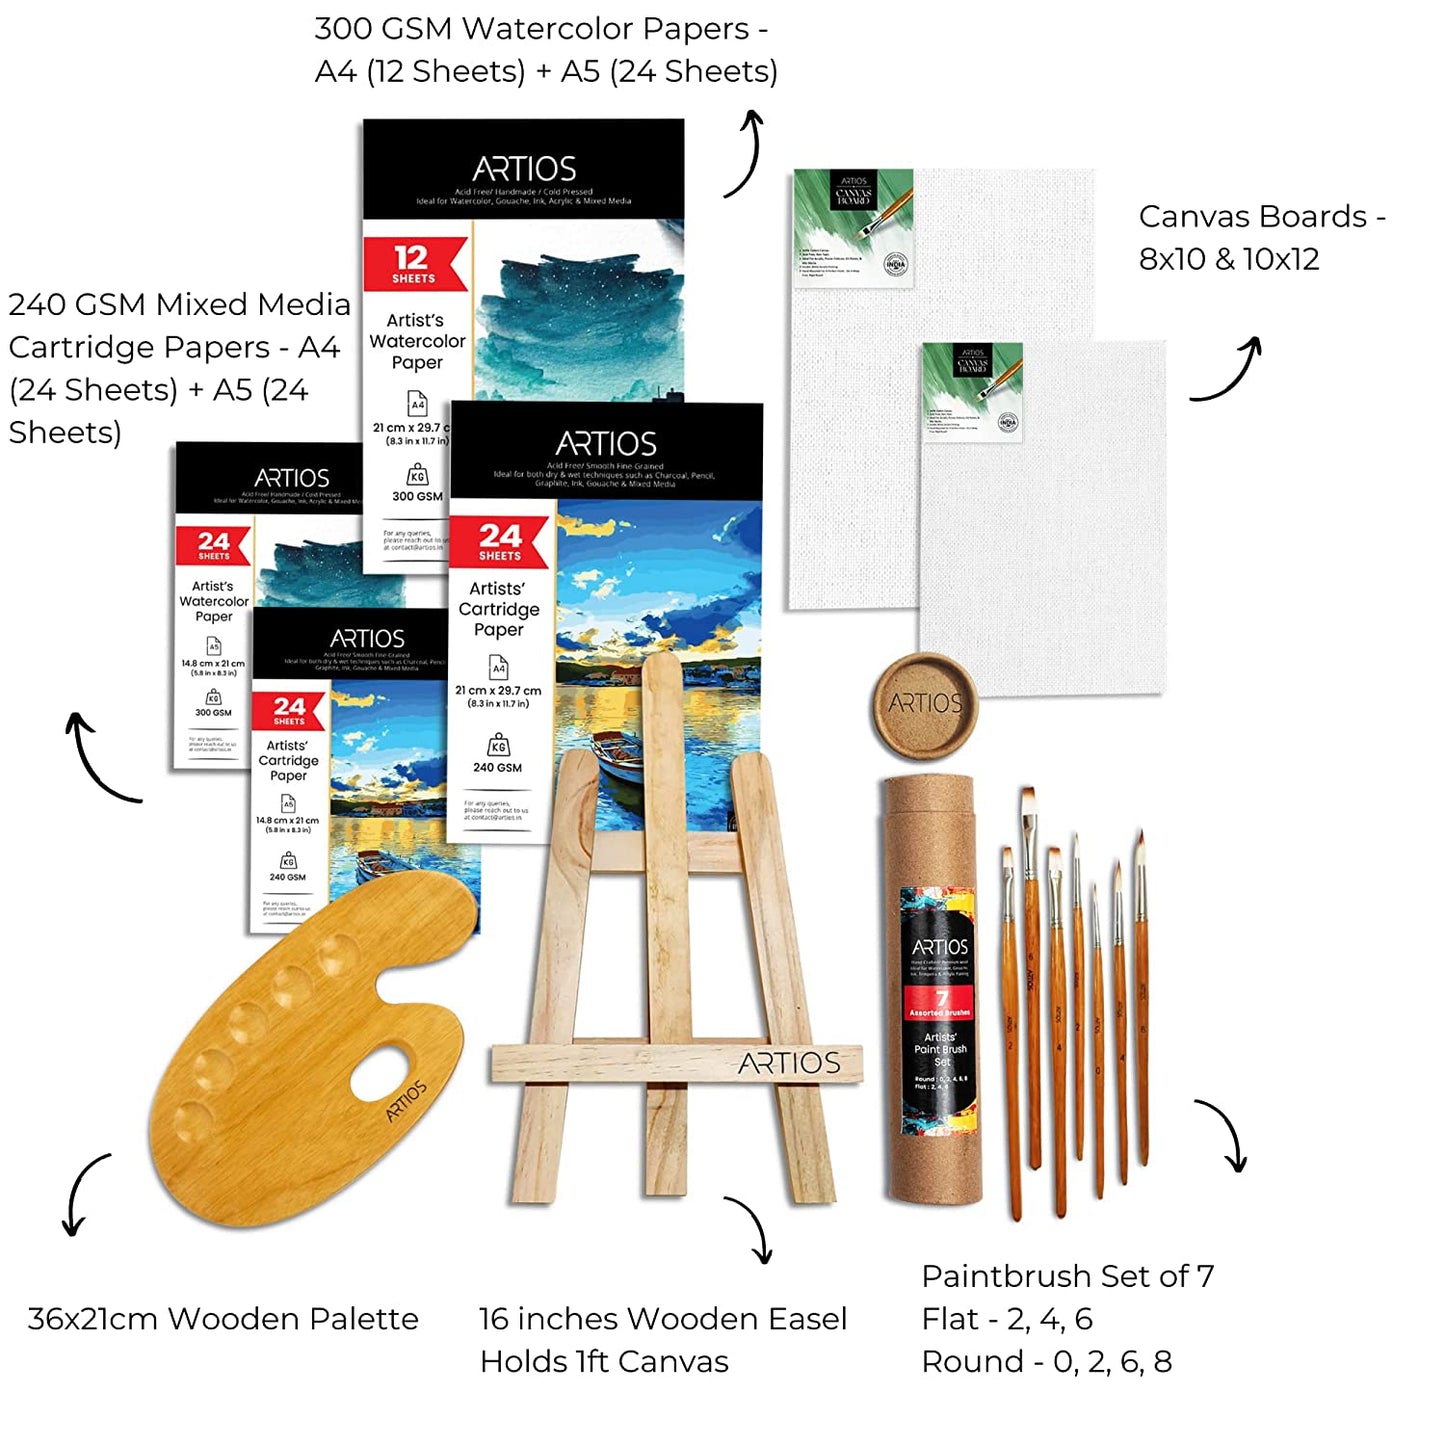 Painting Kit for Artists - 105pcs Painting Set for Adults and Kids at Rs  2695.00, Painting Accessories